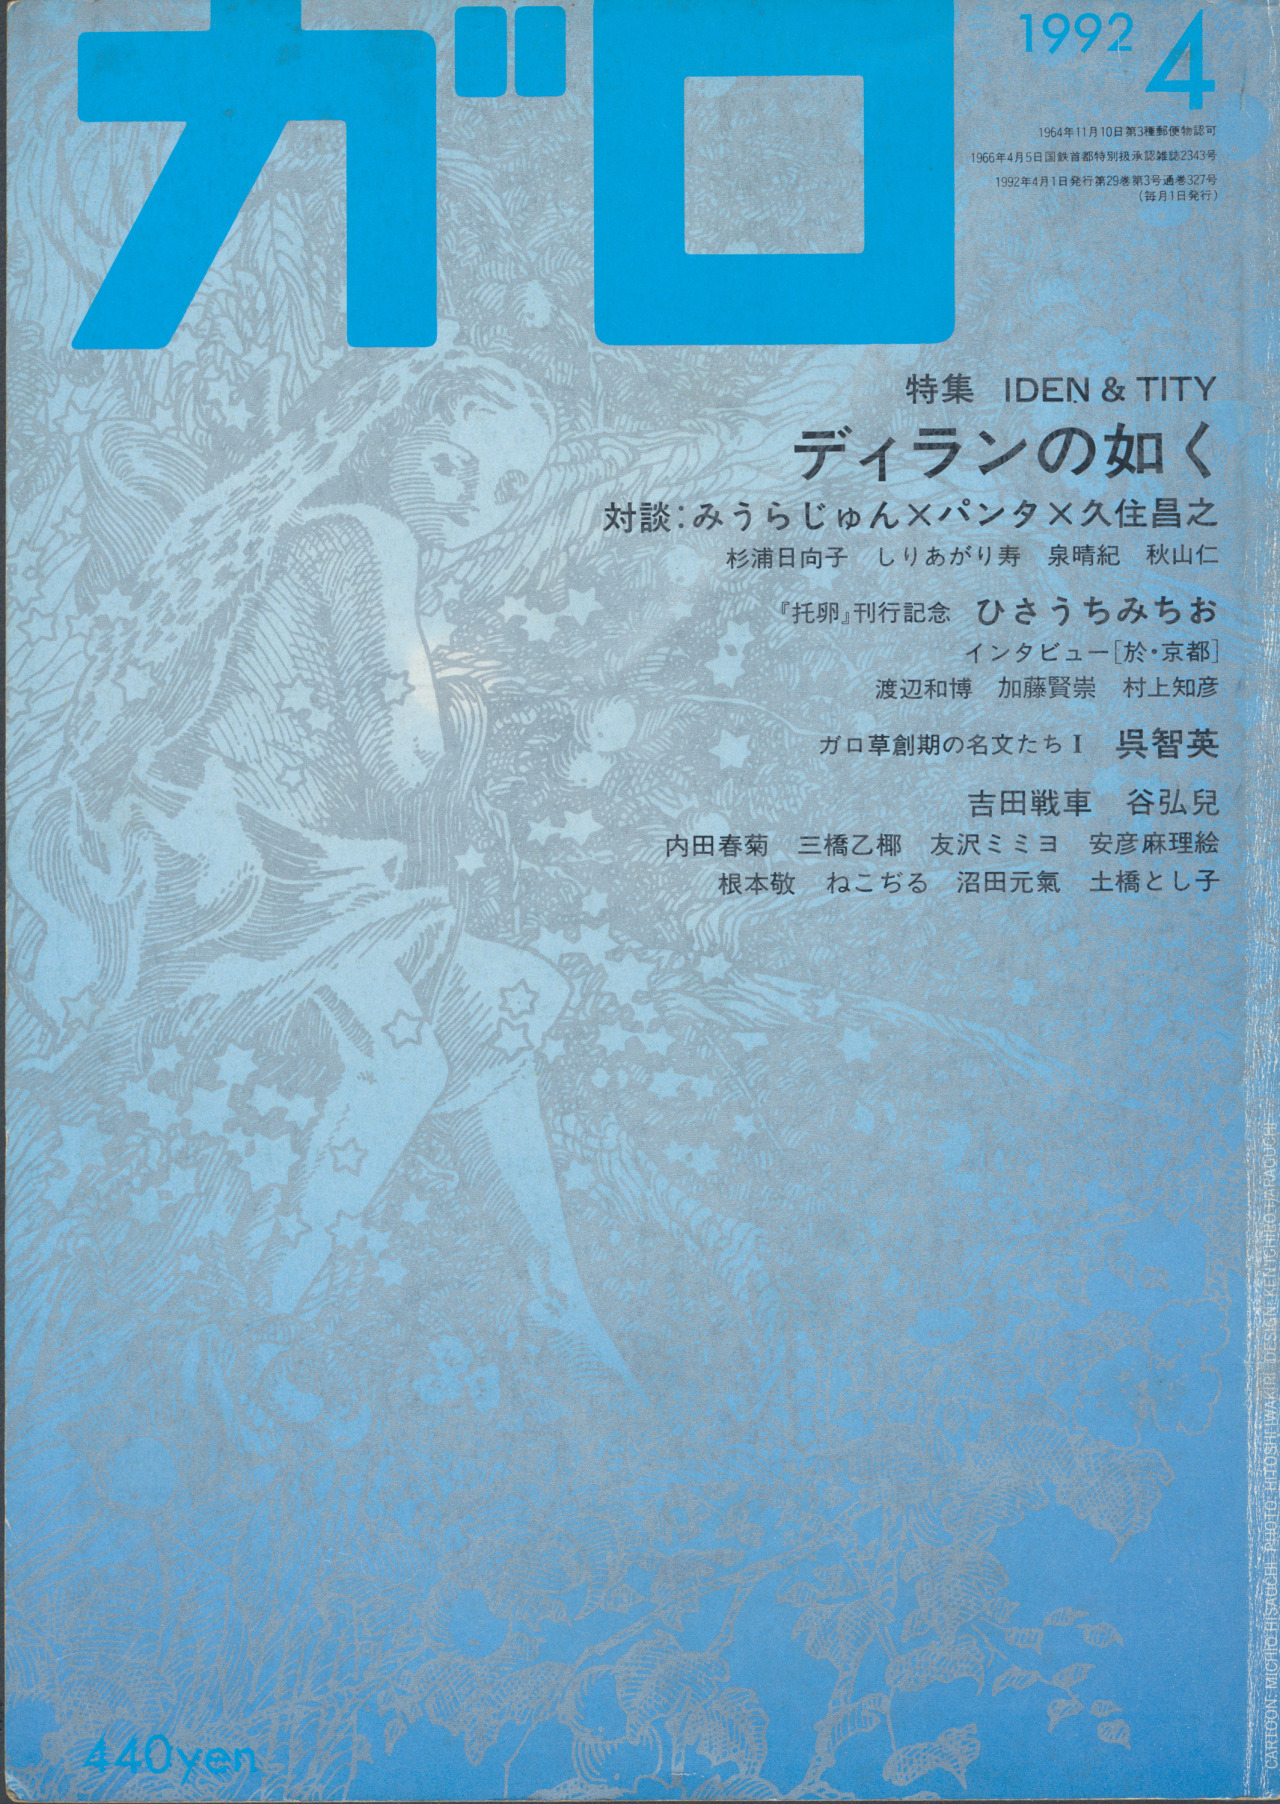 Feh Yes Vintage Manga Deadscanlations Garo 1992 04 Cover By Hisauchi